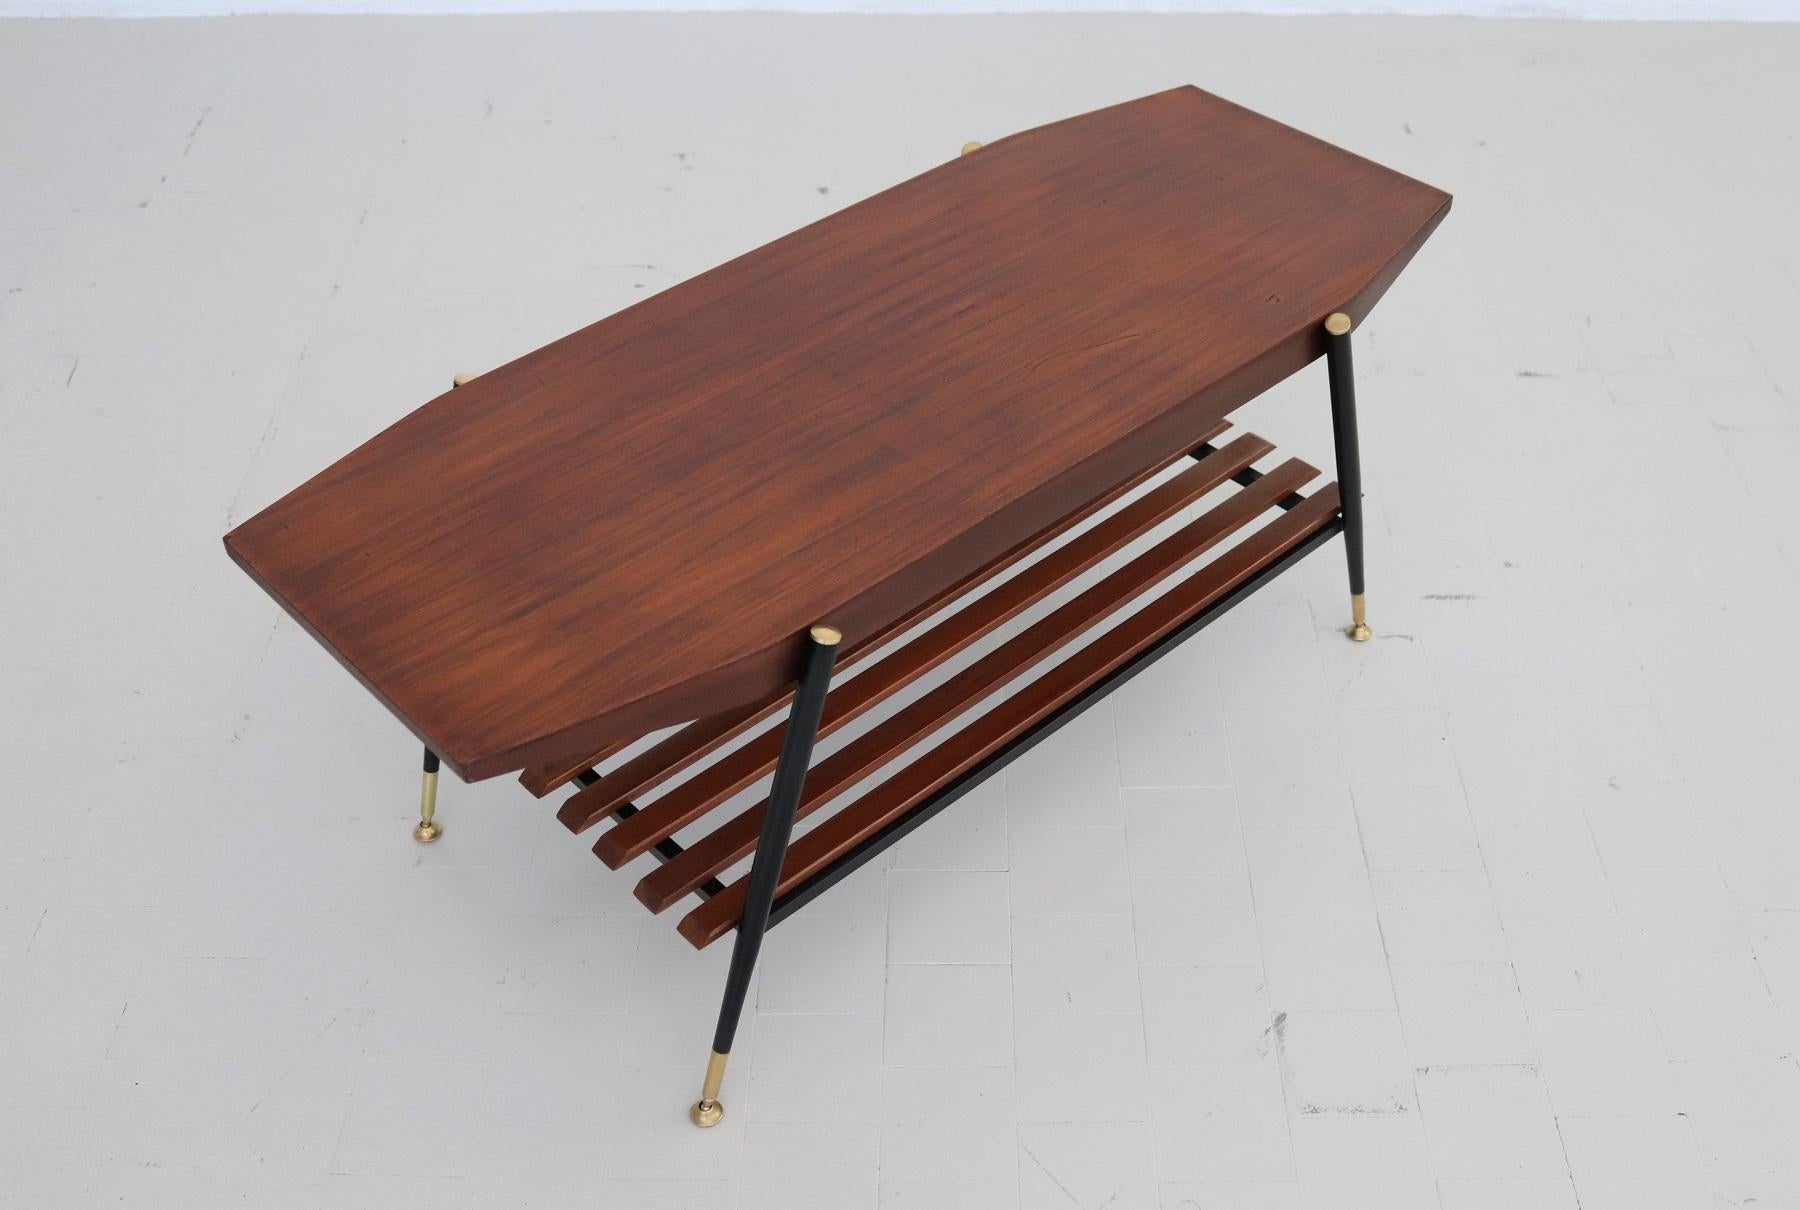 Italian Midcentury Octagonal Coffee Table in Mahogany Veneer with Brass Details In Good Condition For Sale In Morazzone, Varese